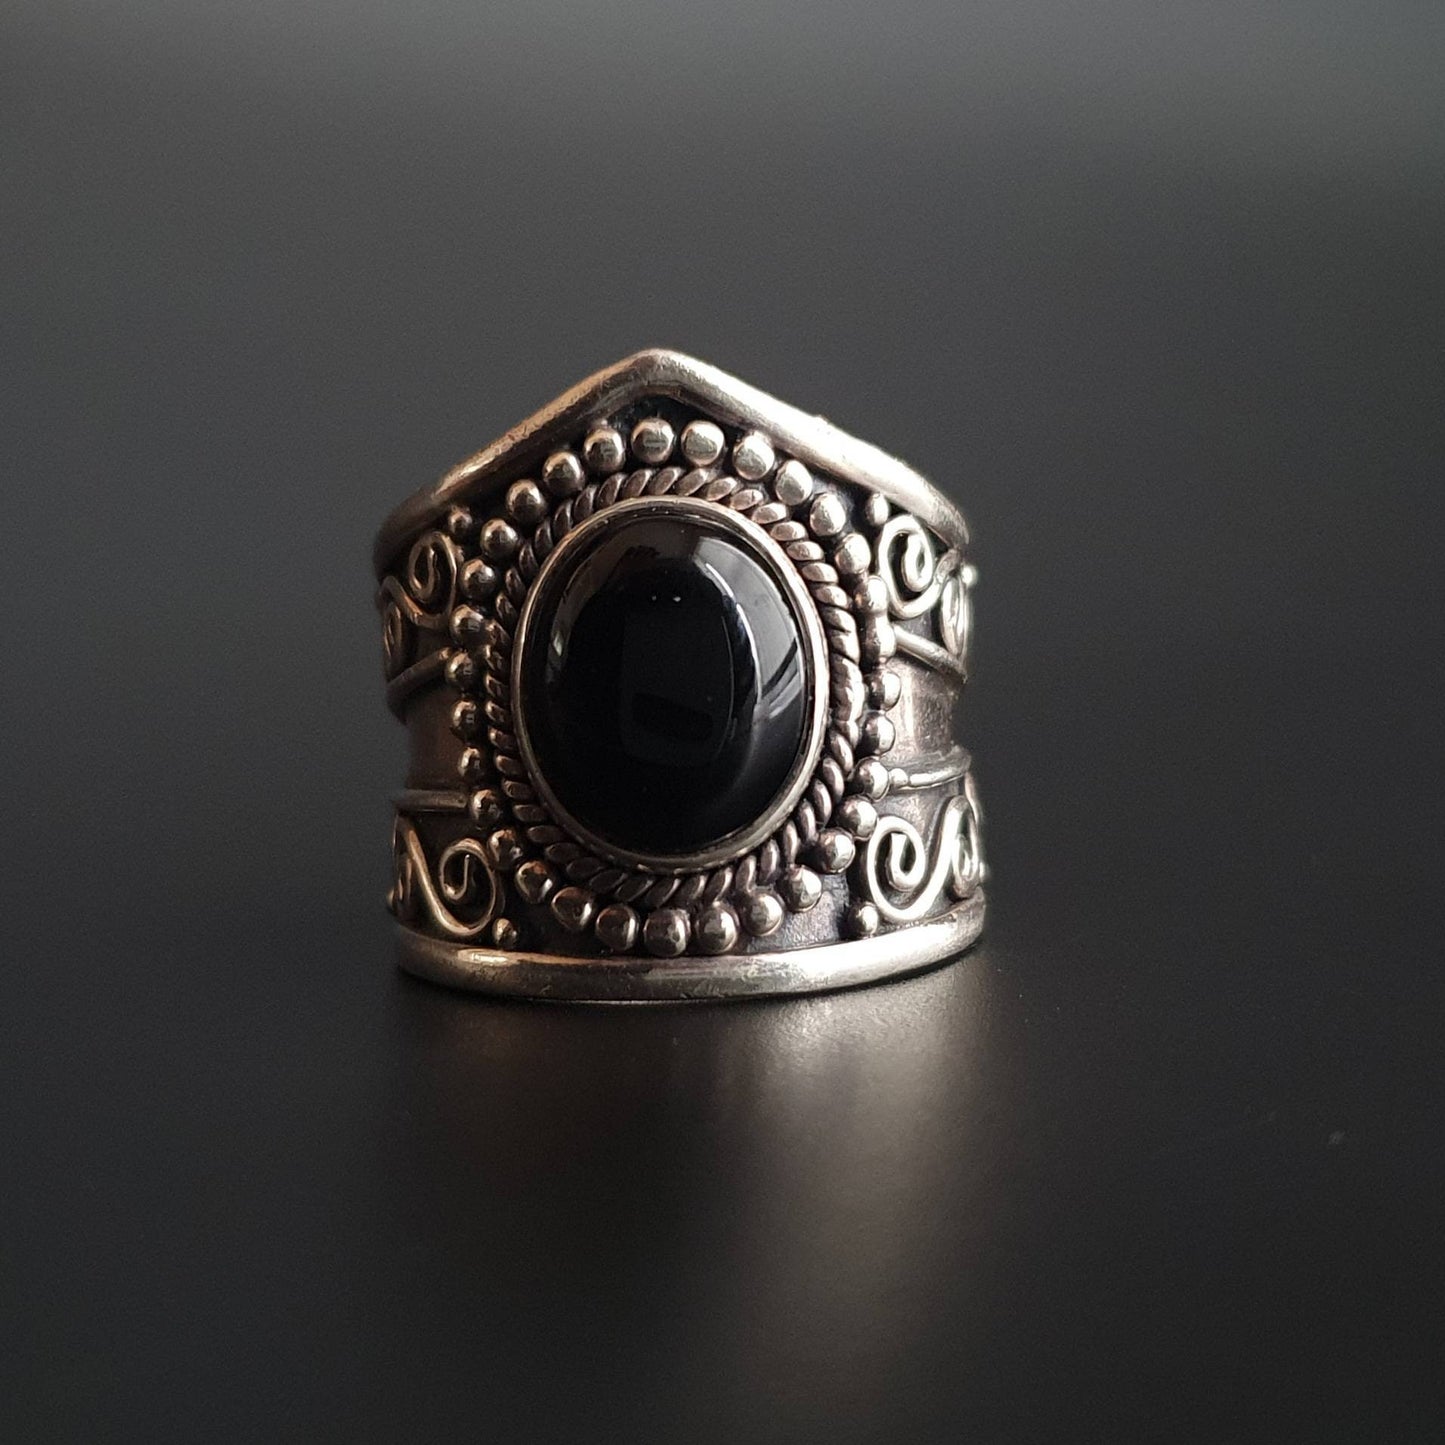 Vintage,ring, silver ring, statement,chic,sterling silver, jewellery, gift's, unique, unisex, chunky ring, onyx, black, witchy, gemstone,925